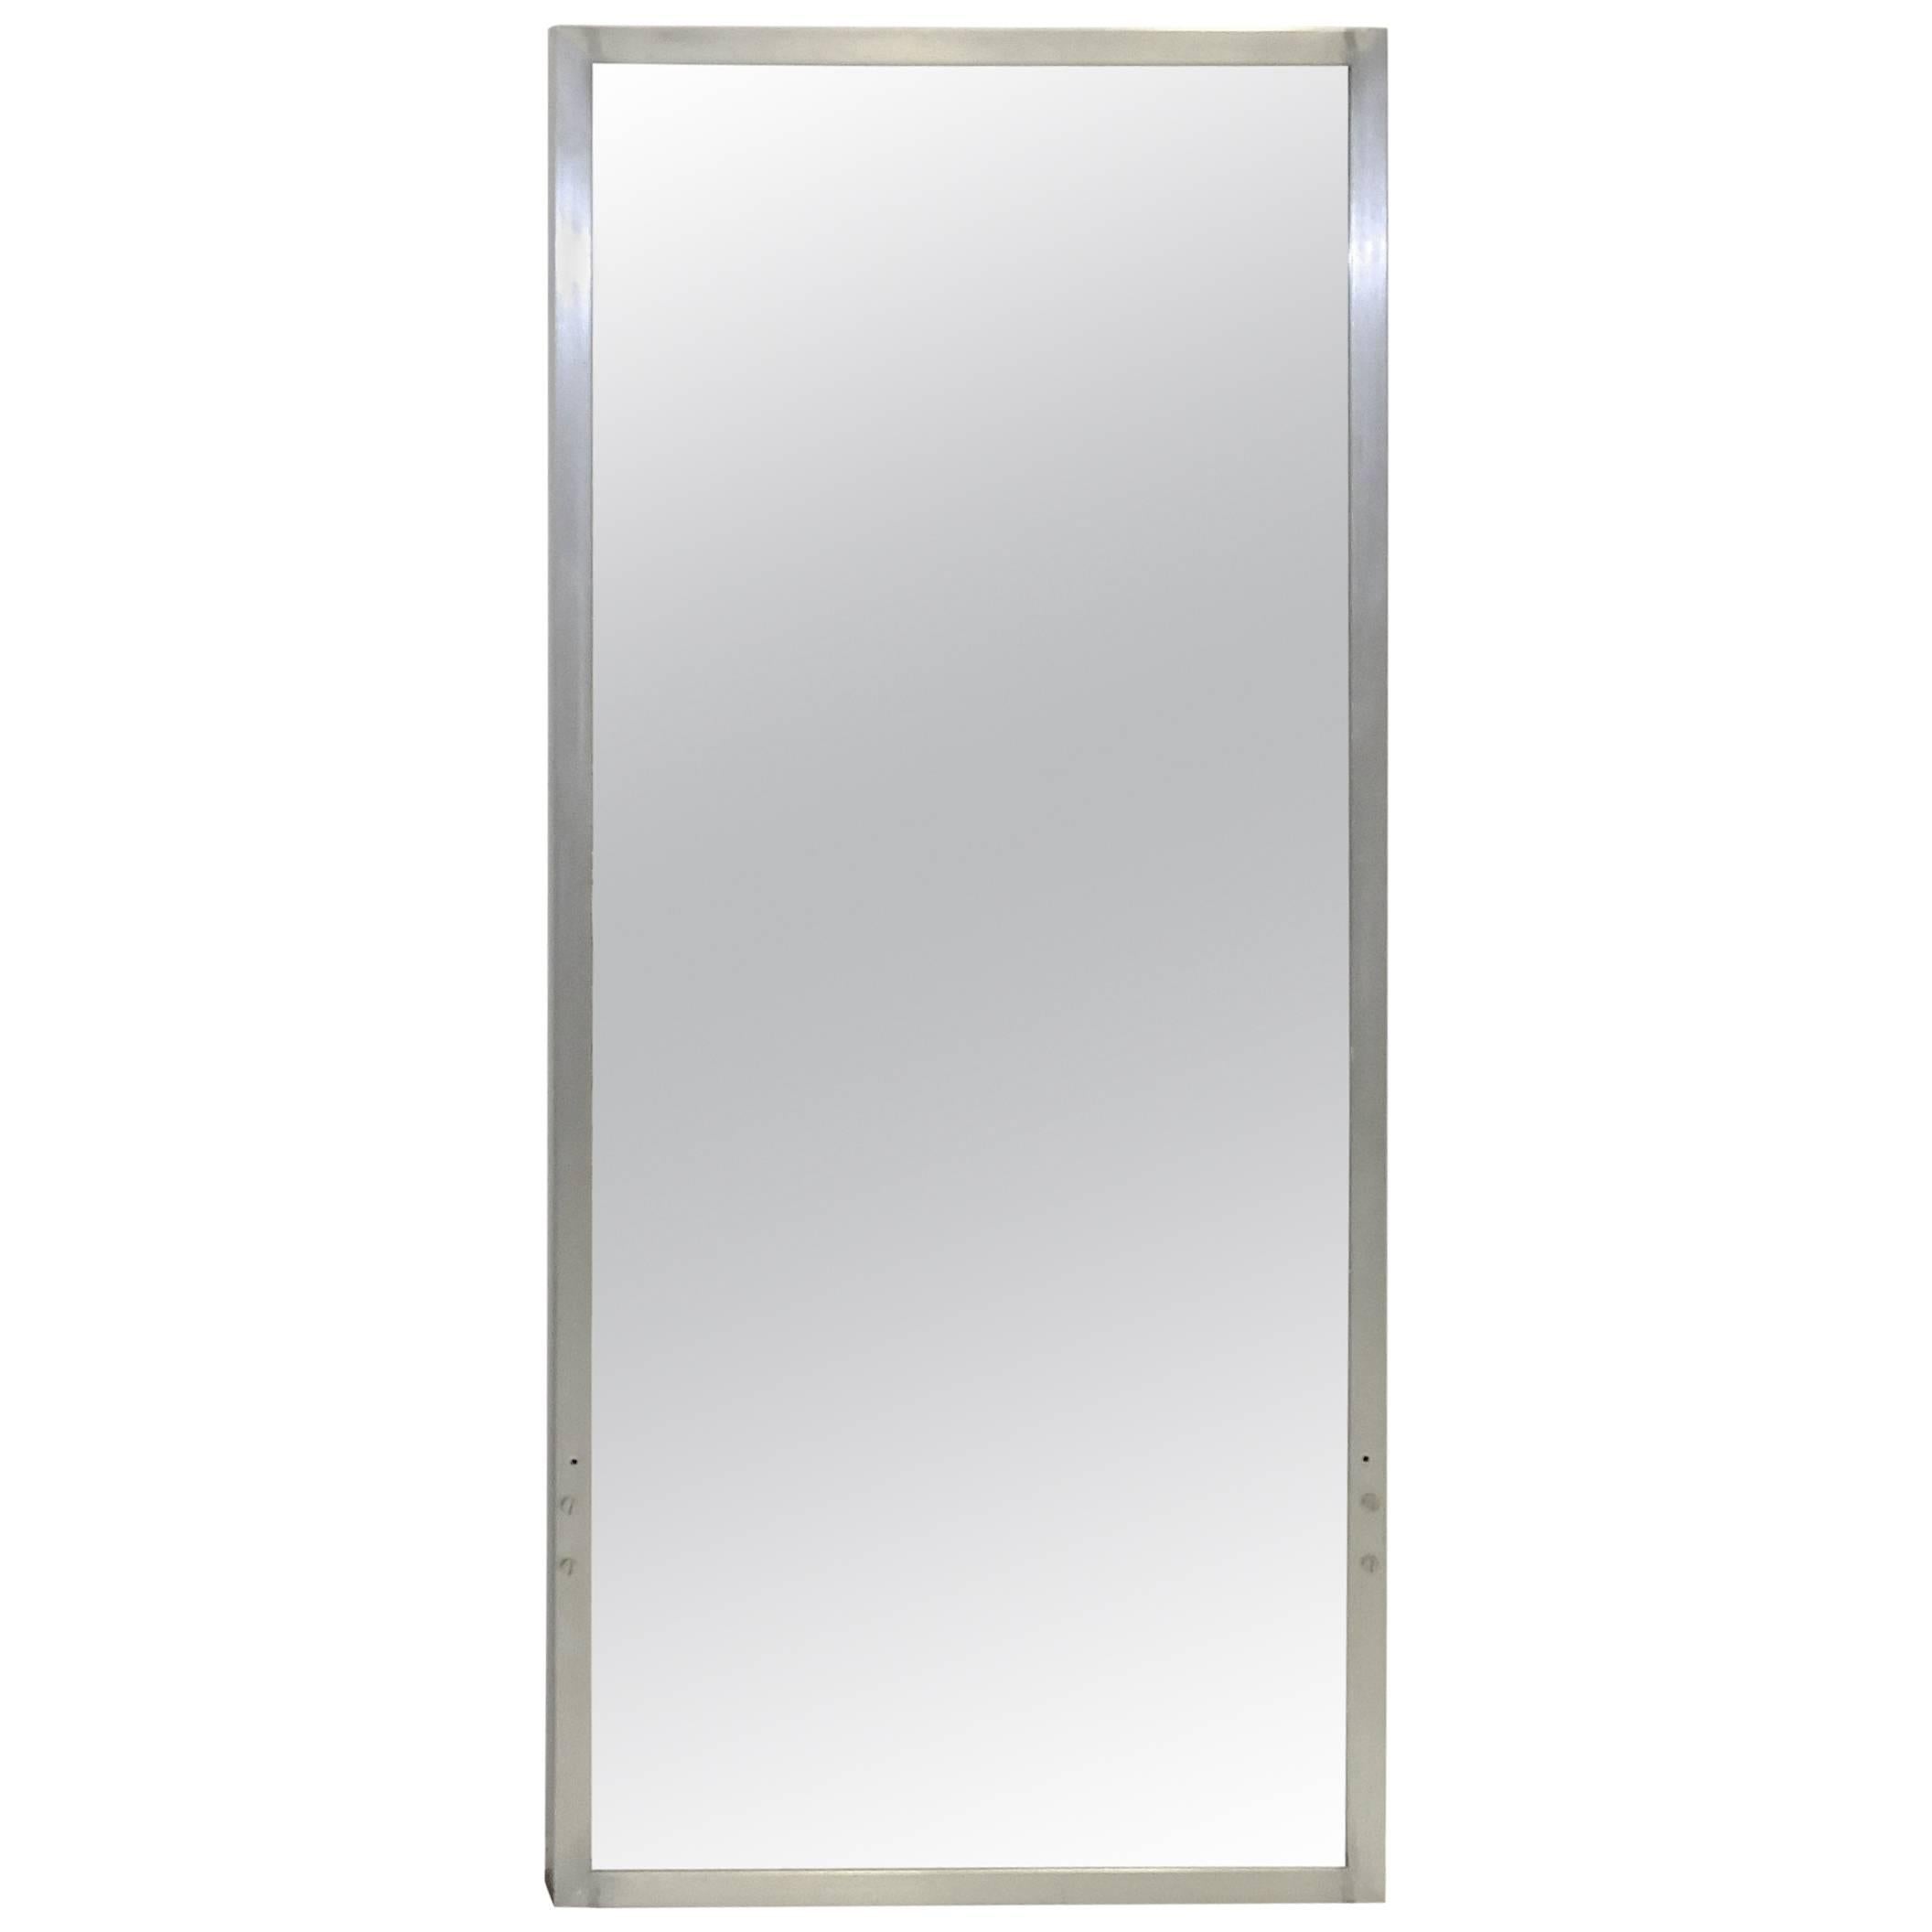 S.S. United States Wall Mirror with Aluminium Frame For Sale